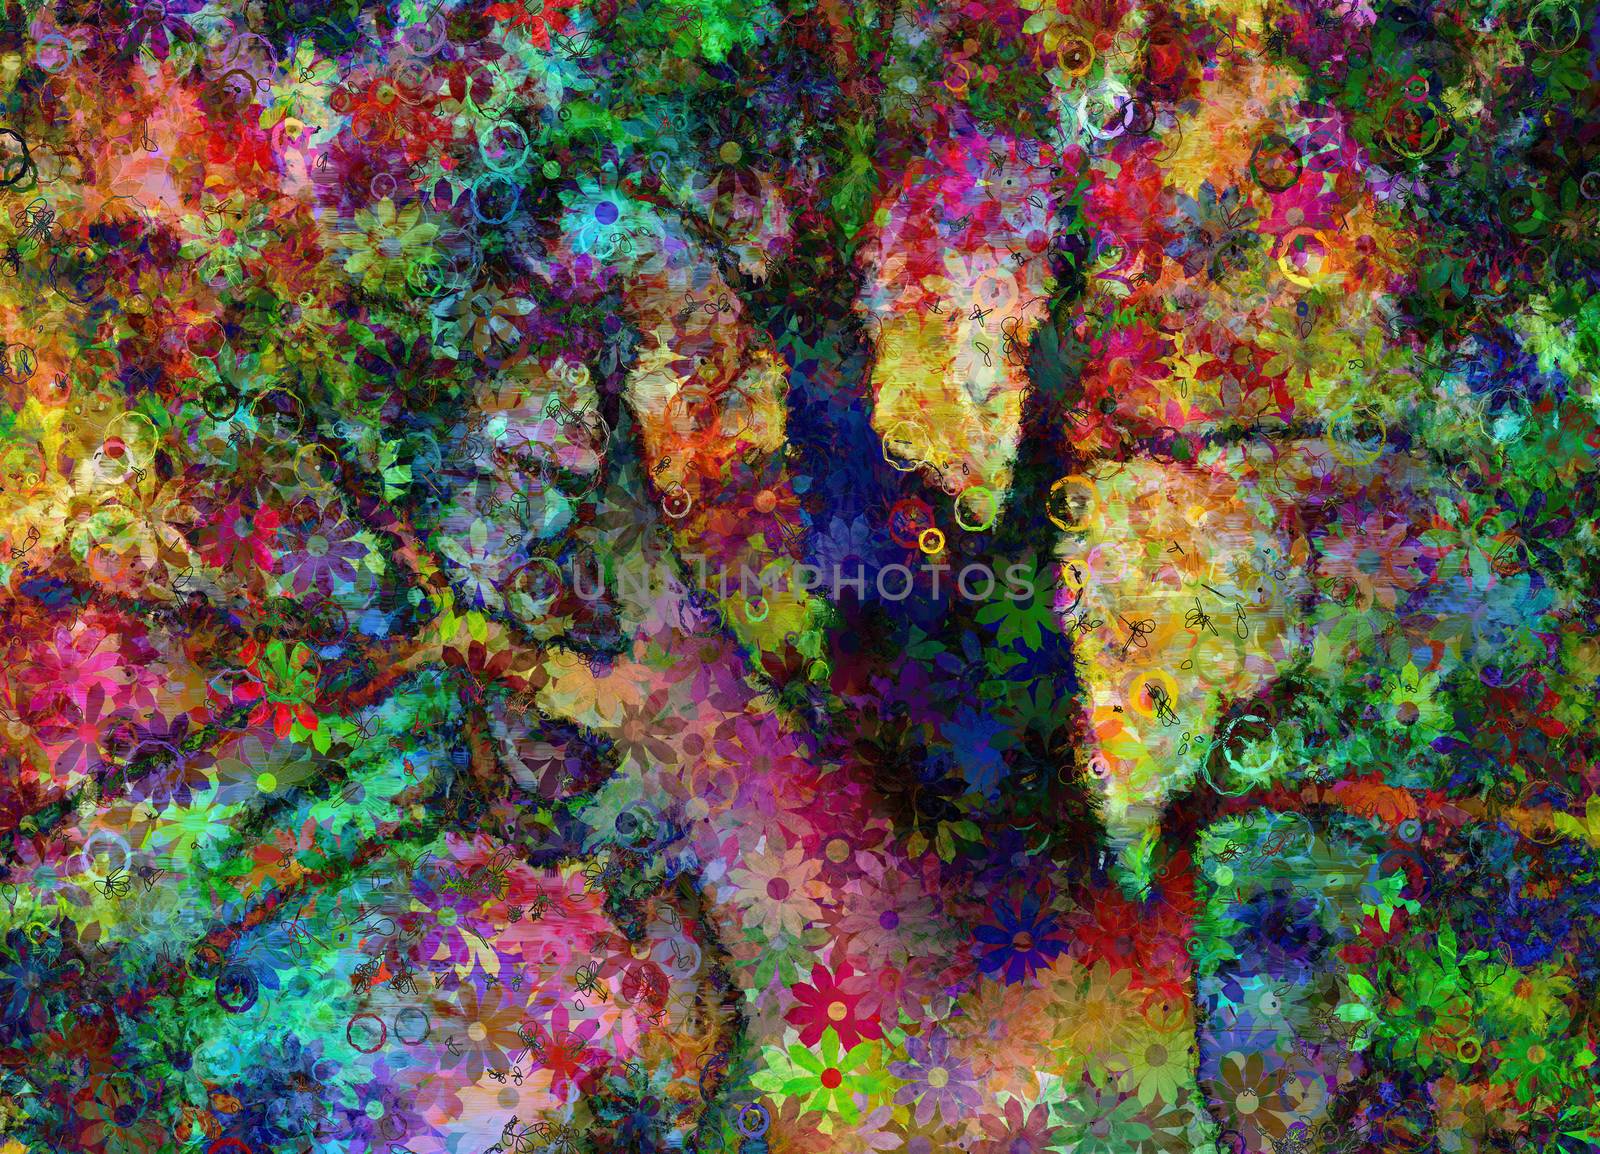 Colorful Abstract Tree with Flowers Pattern. 3D rendering.